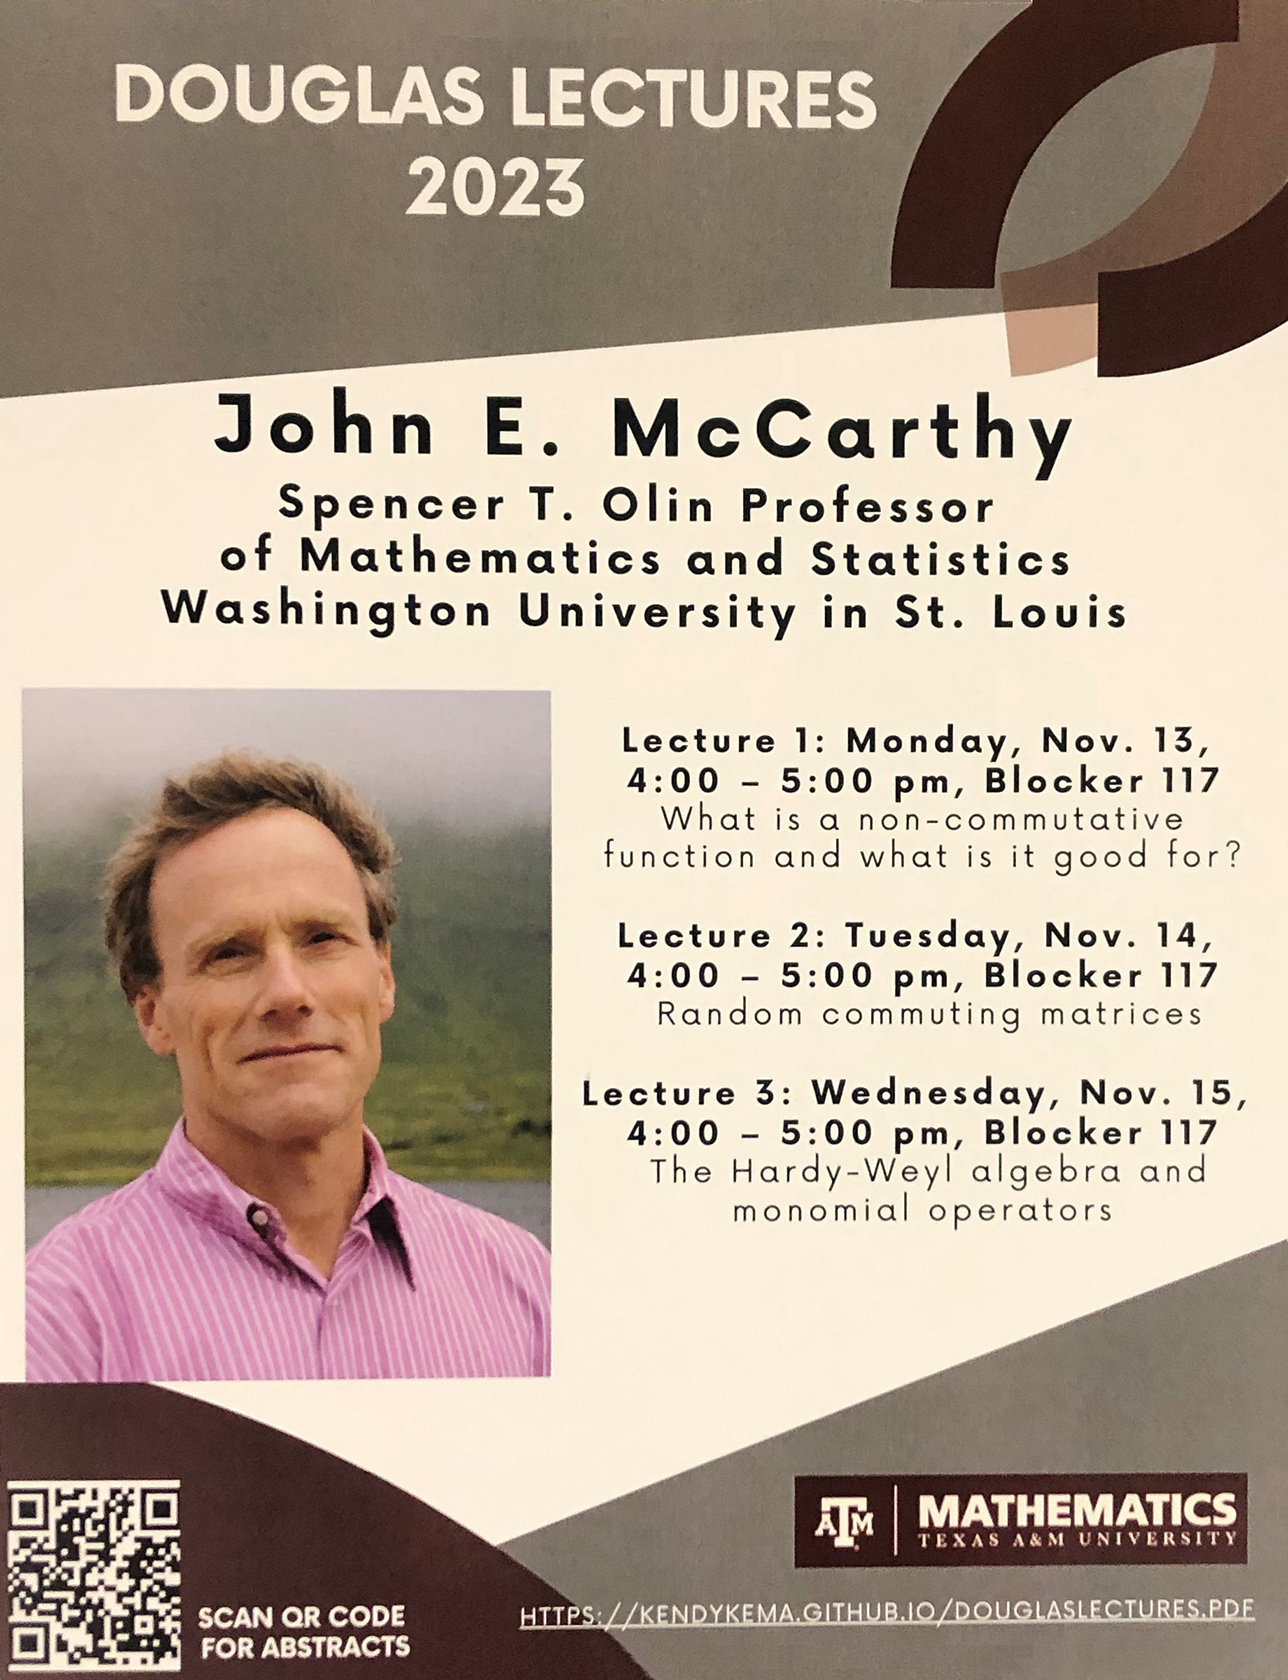 Flyer promoting the 2023 Douglas Lectures at Texas A&amp;M University